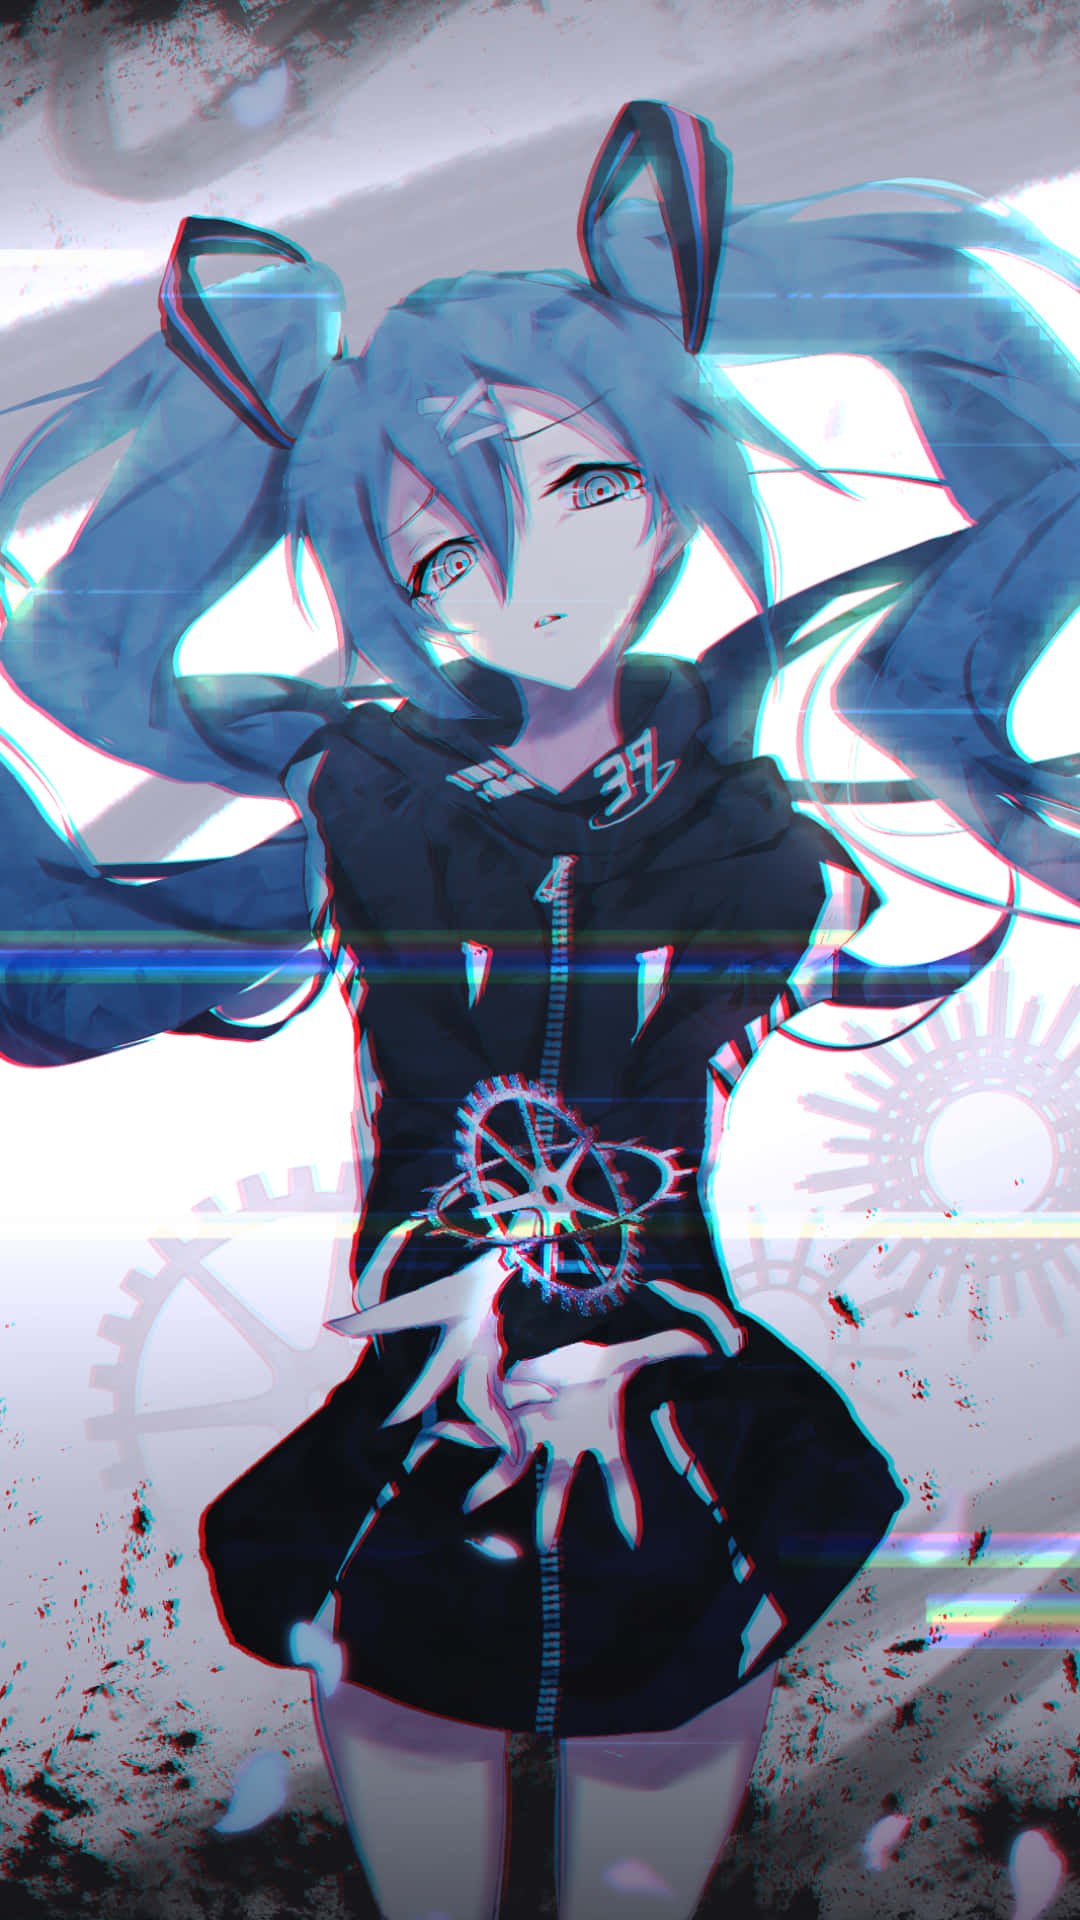 "Power Up Your Day with Hatsune Miku's Phone" Wallpaper